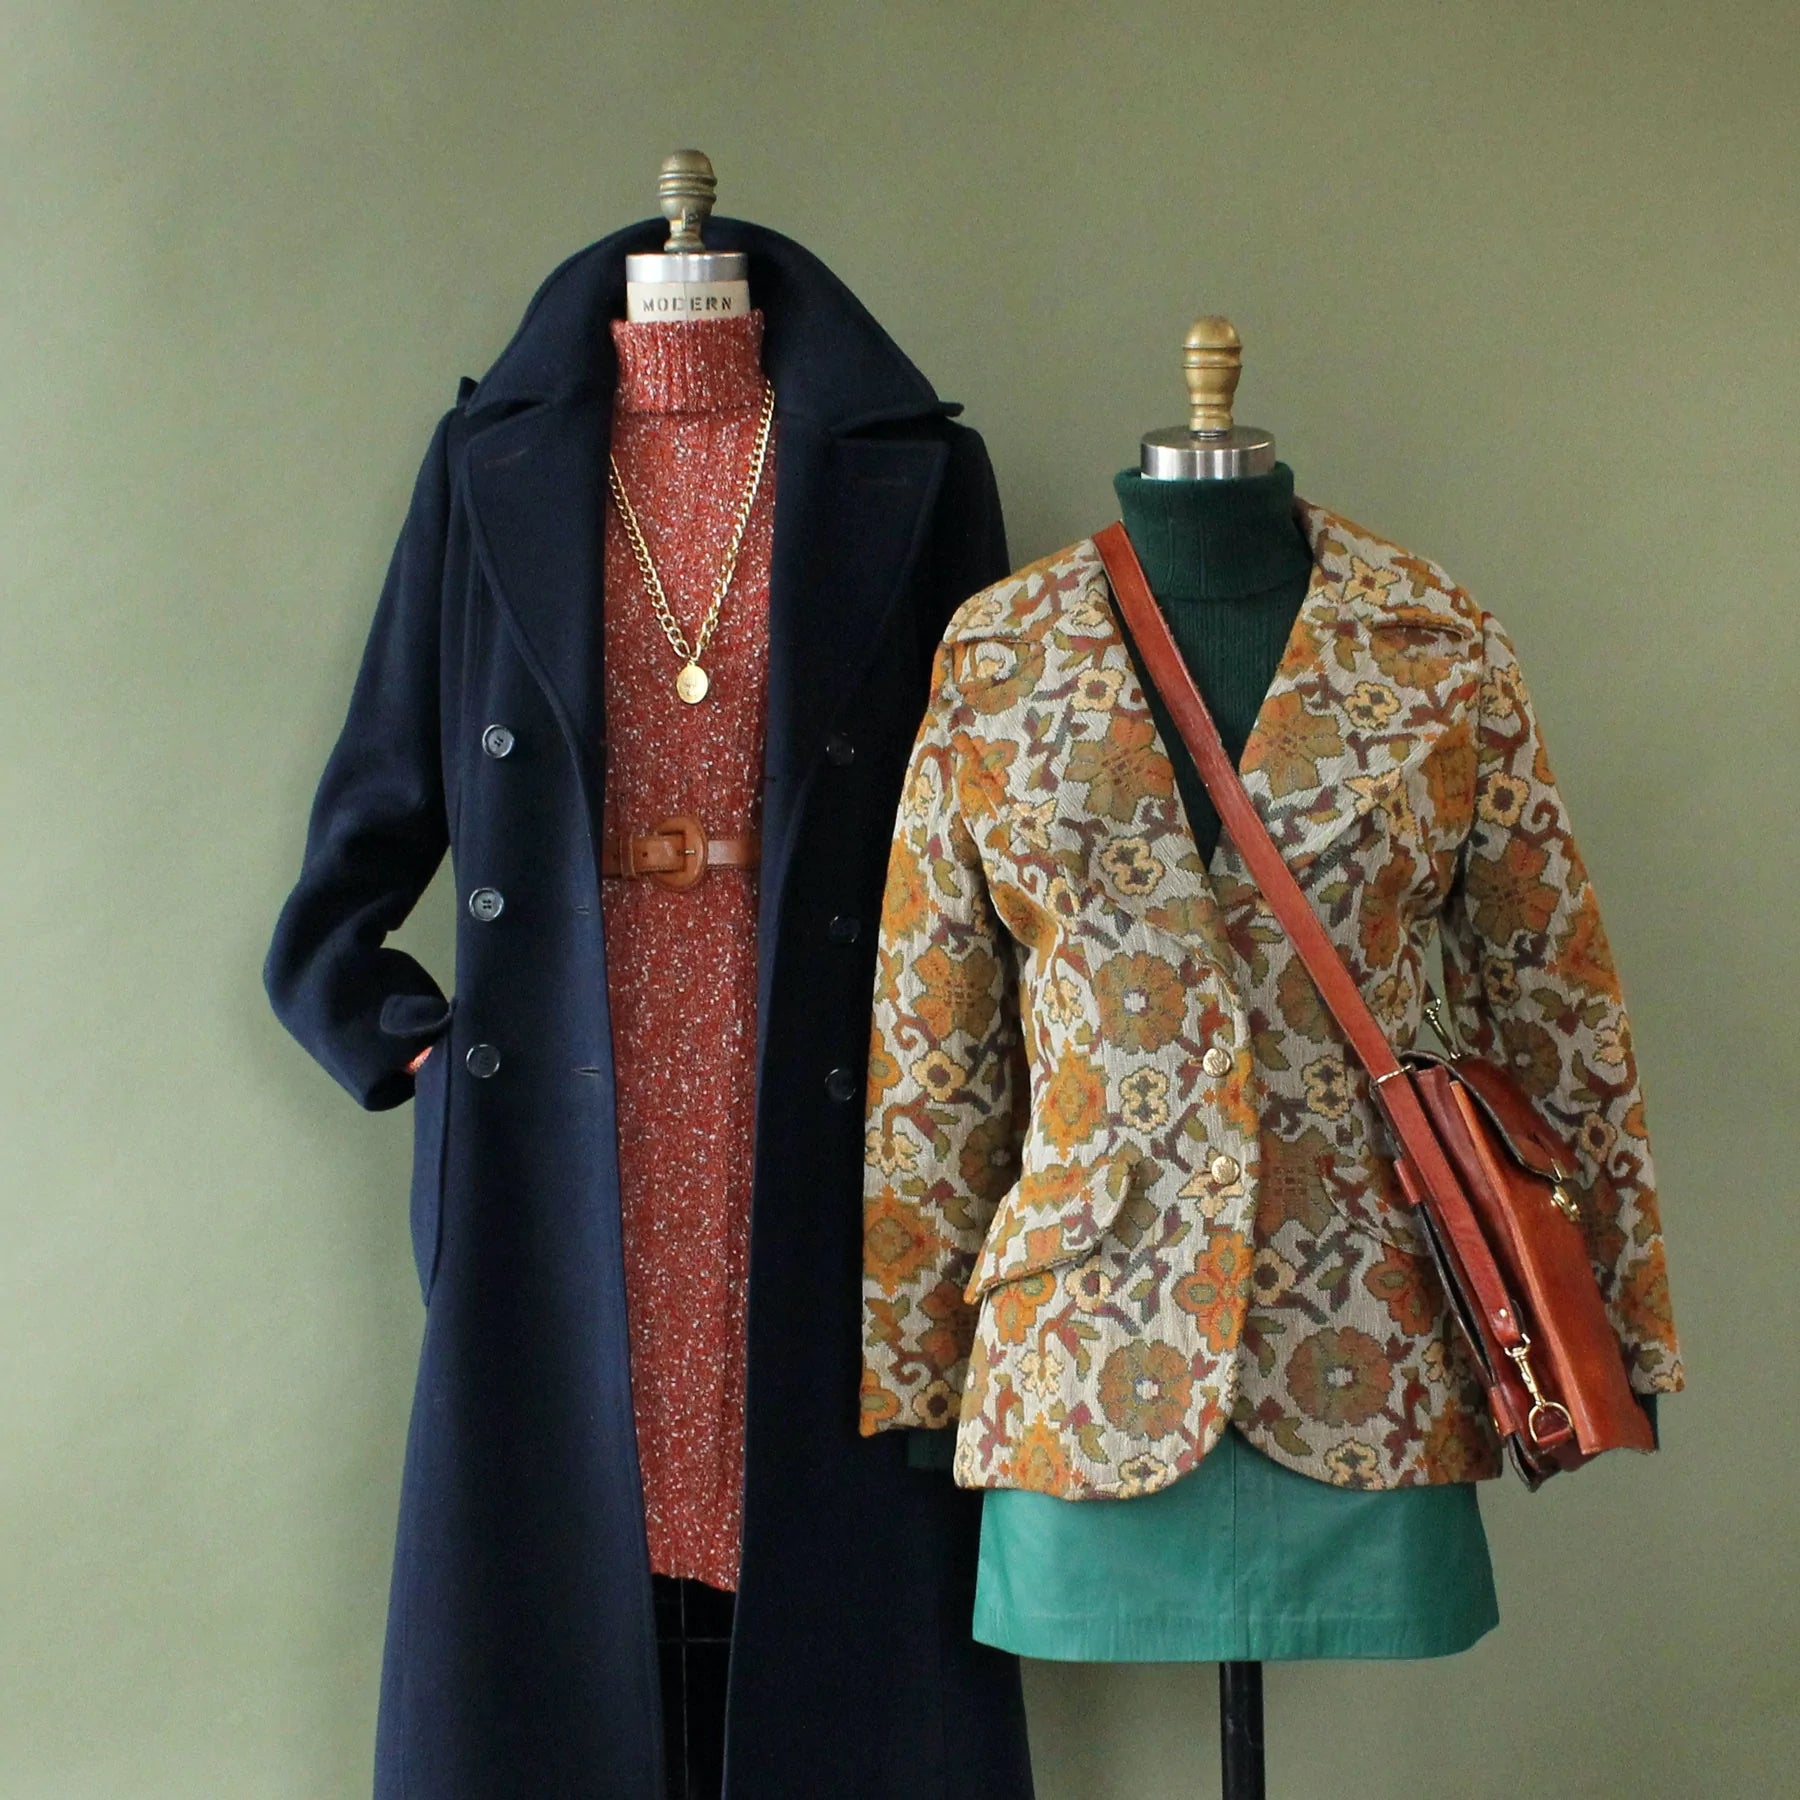 Two vintage looks styles on dressforms